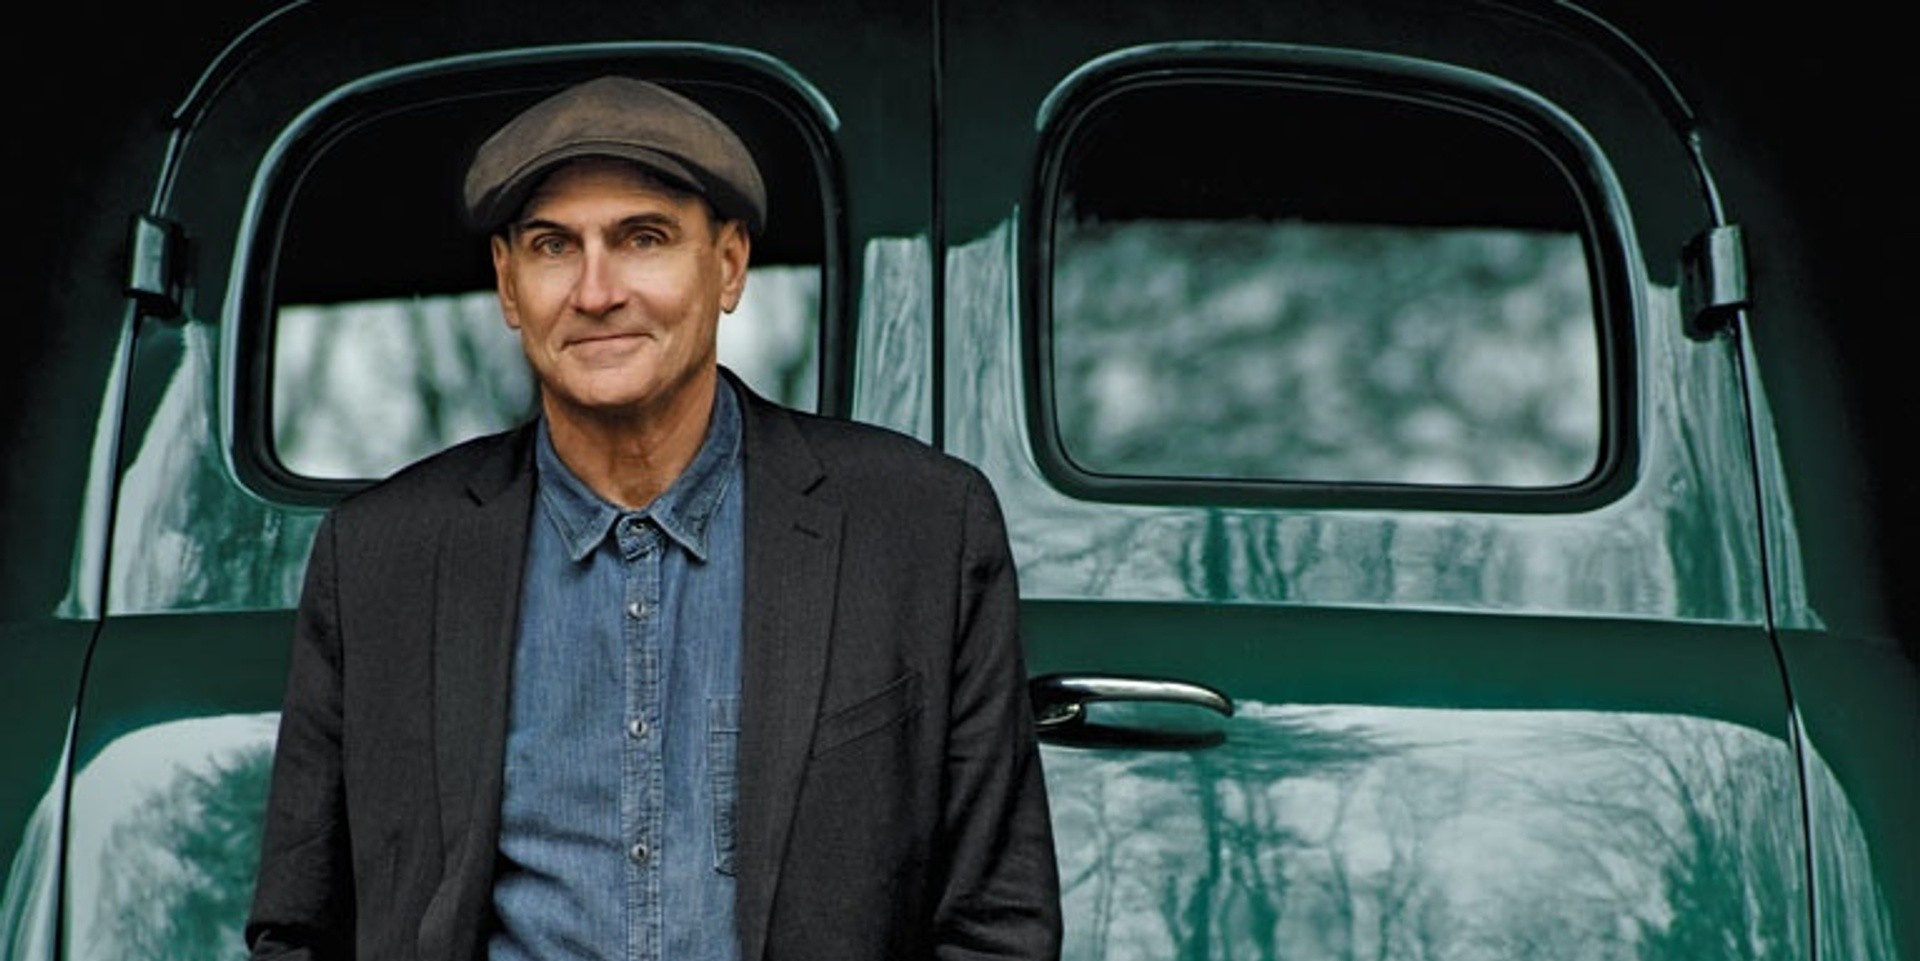 James Taylor returns to Manila for a headlining concert after 20 years